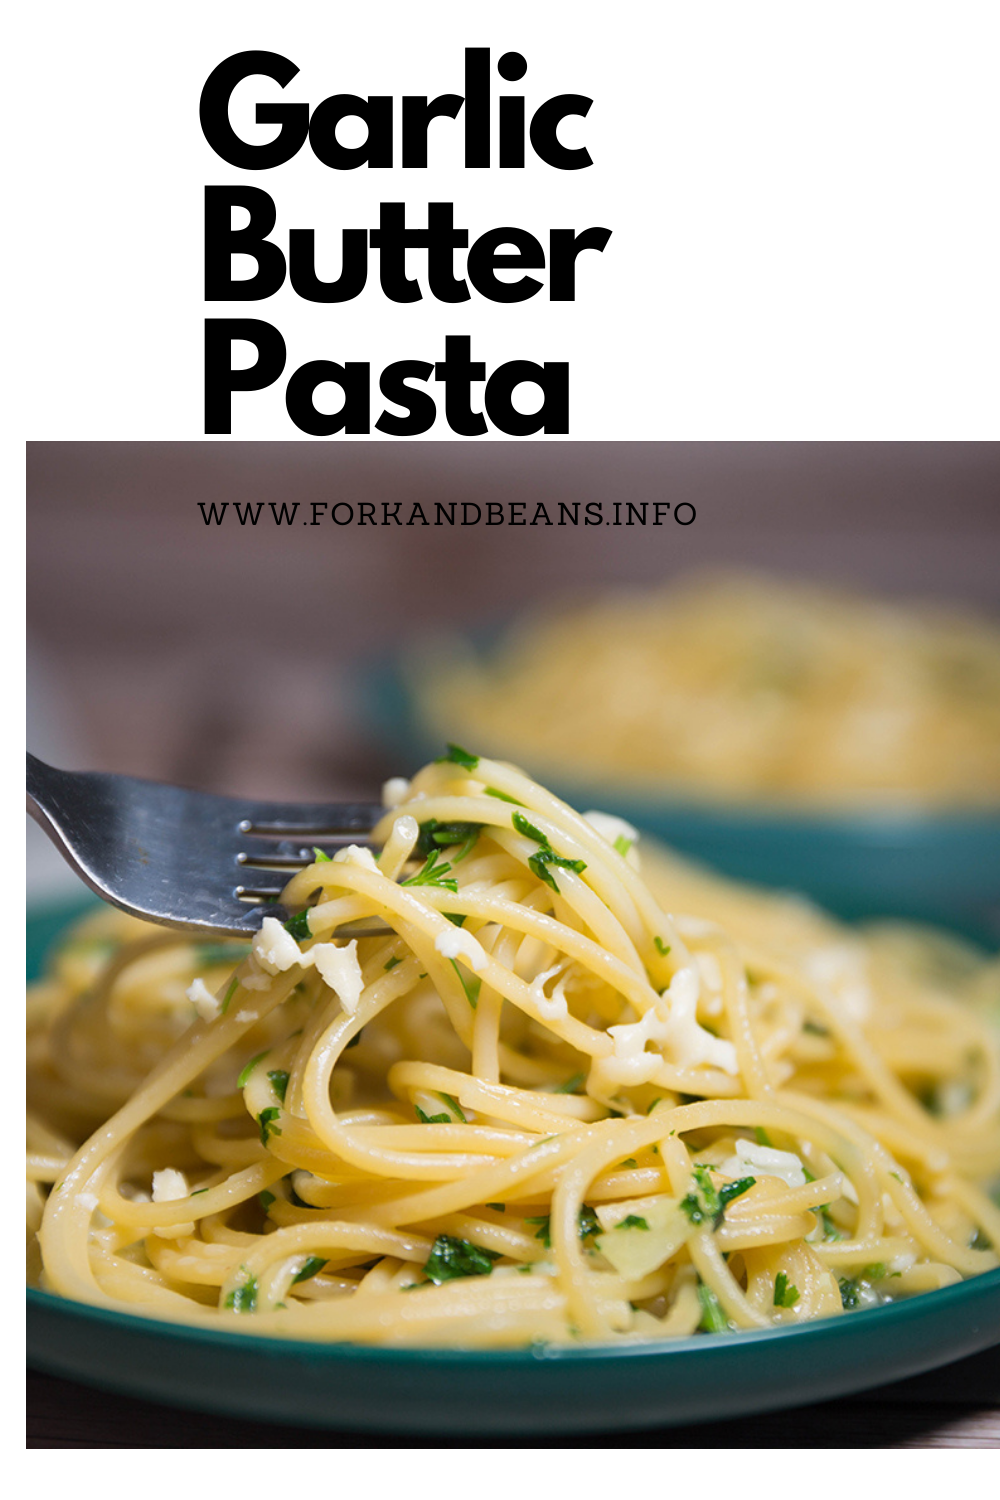 Learn how to make garlic butter pasta at home!